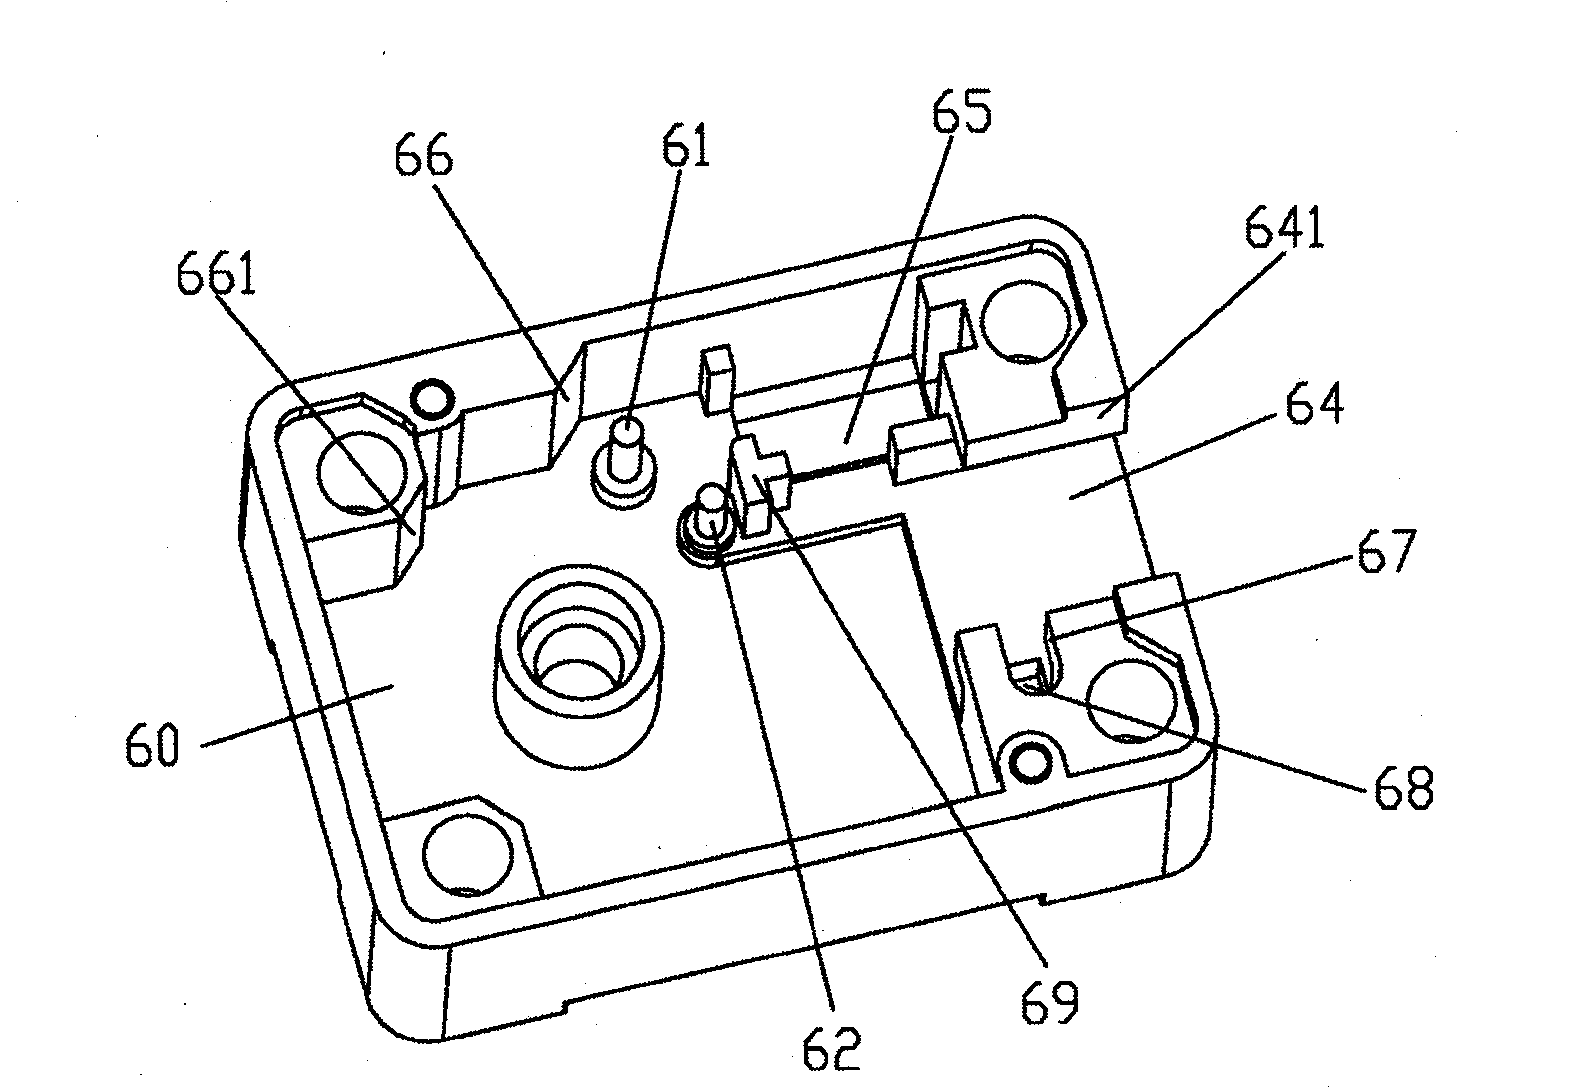 Puzzle lock and its mechanism